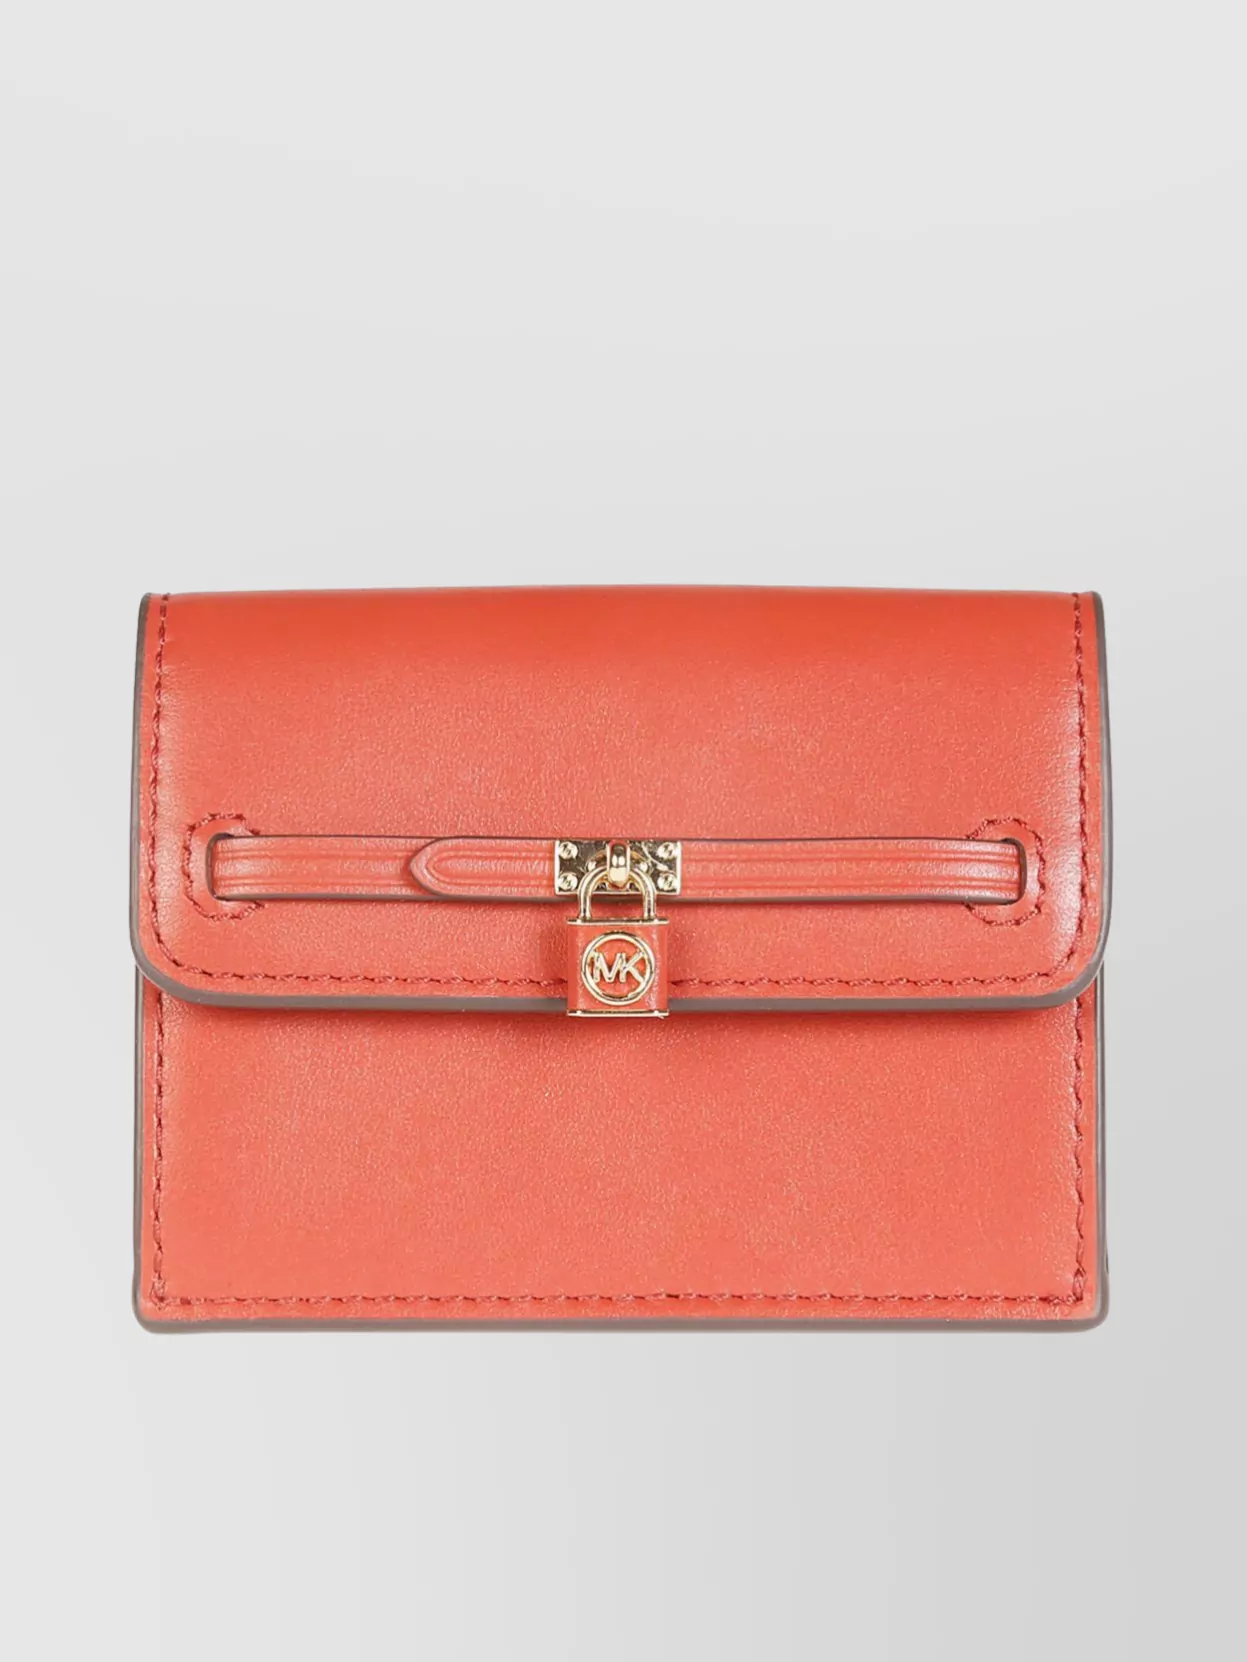 Shop Michael Kors Structured Cardholder With Detailed Stitching And Metal Accents